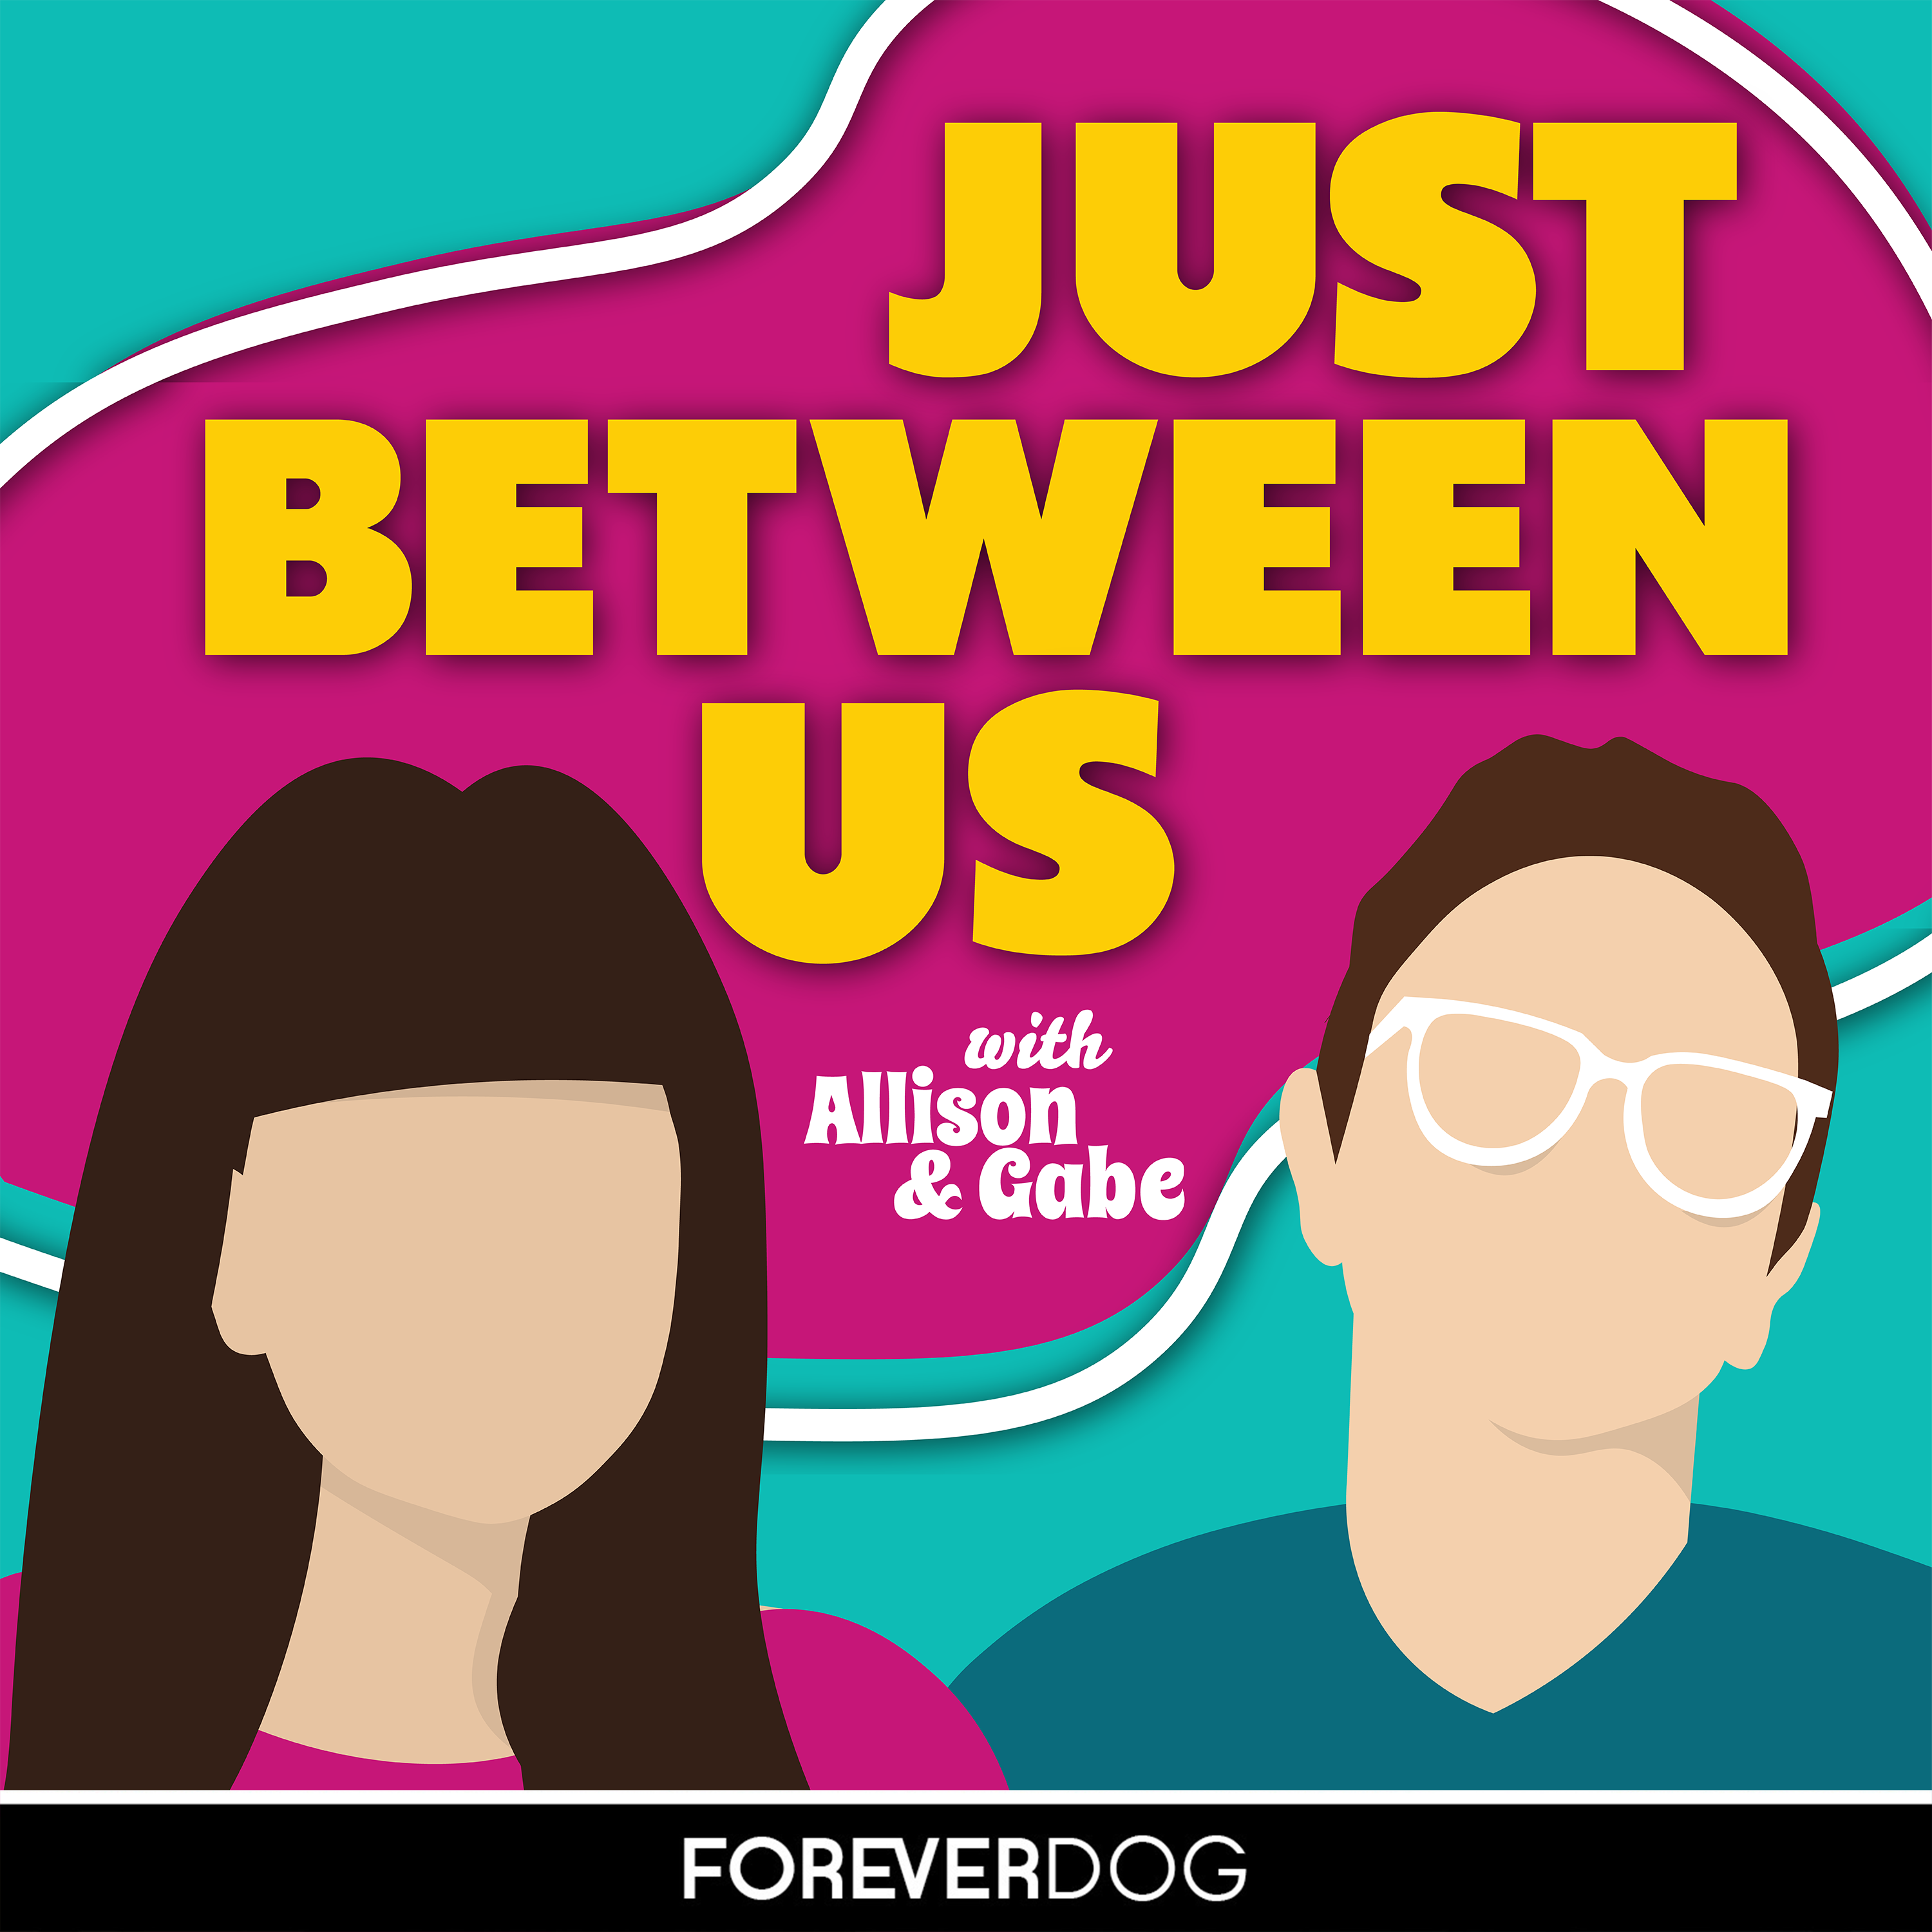 Simran Bf Simran Bf Simran Bf Simran Bf Simran Bf - Just Between Us | Forever Dog Podcast Network